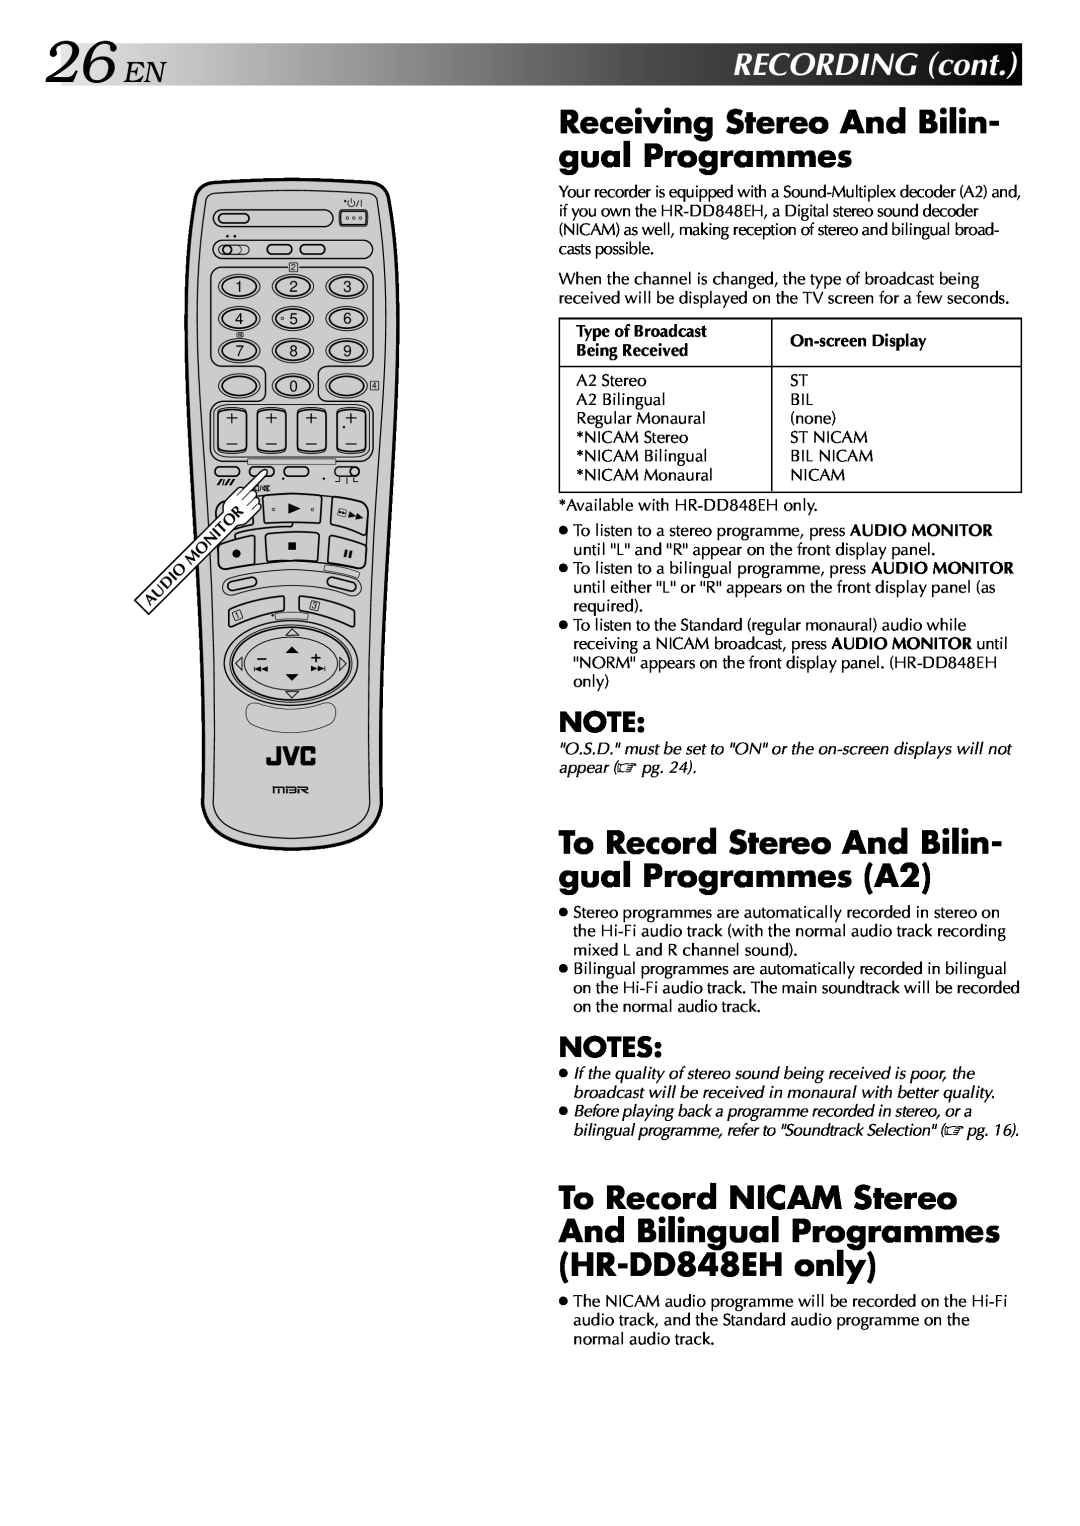 JVC HR-DD848E 26ENRECORDINGcont, Receiving Stereo And Bilin- gual Programmes, Type of Broadcast, On-screen Display 